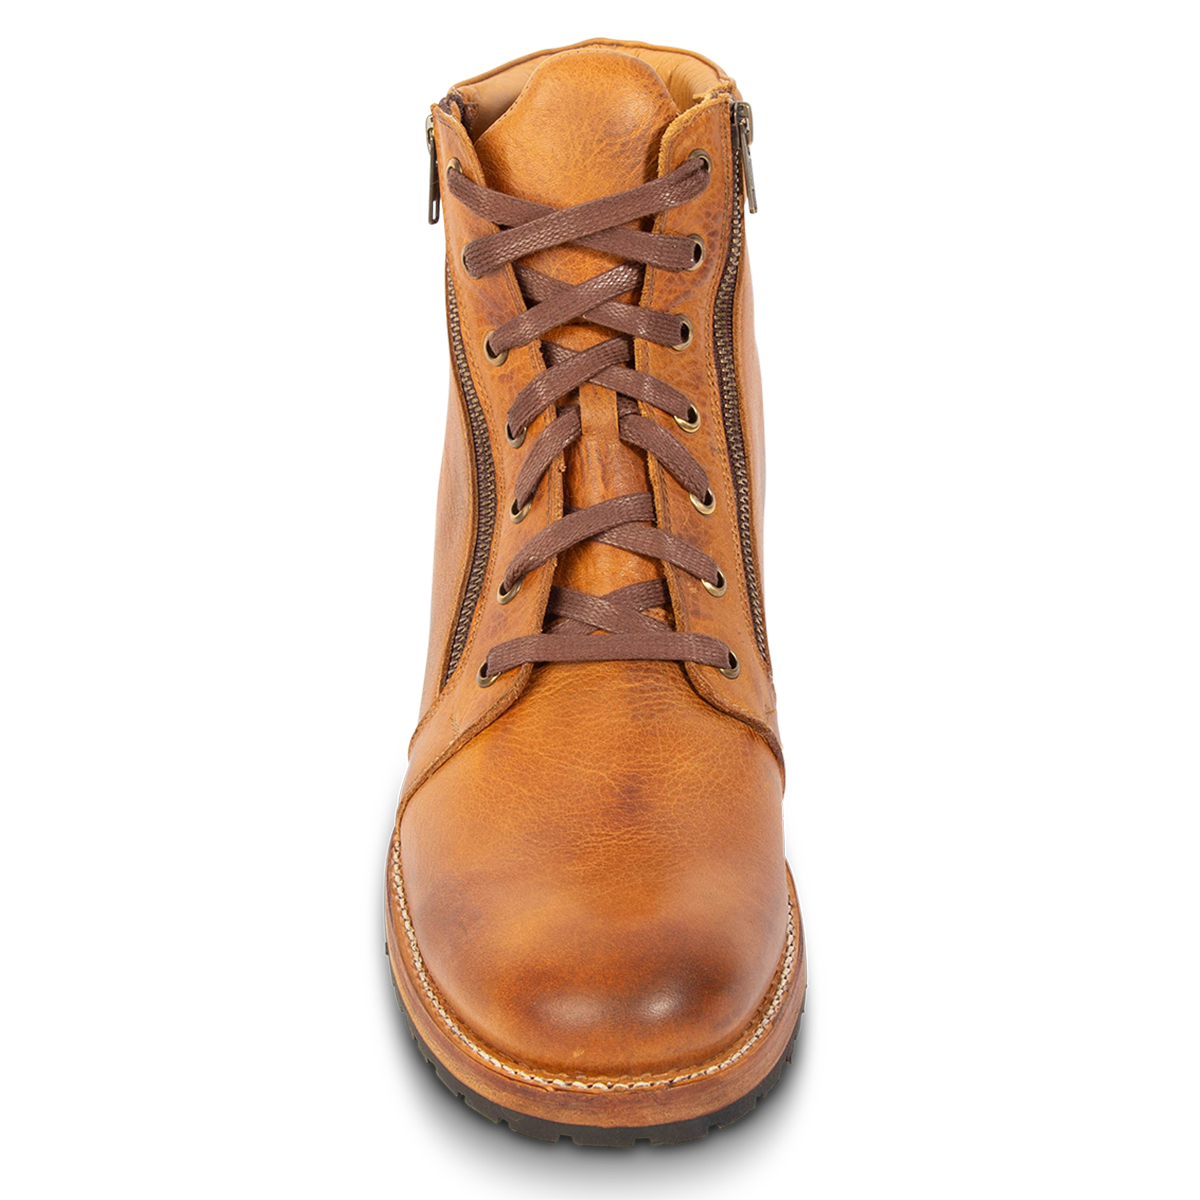 Front view showing symmetrical brass zipper closures and front tie lacing on FREEBIRD men's Chevy tan leather boot